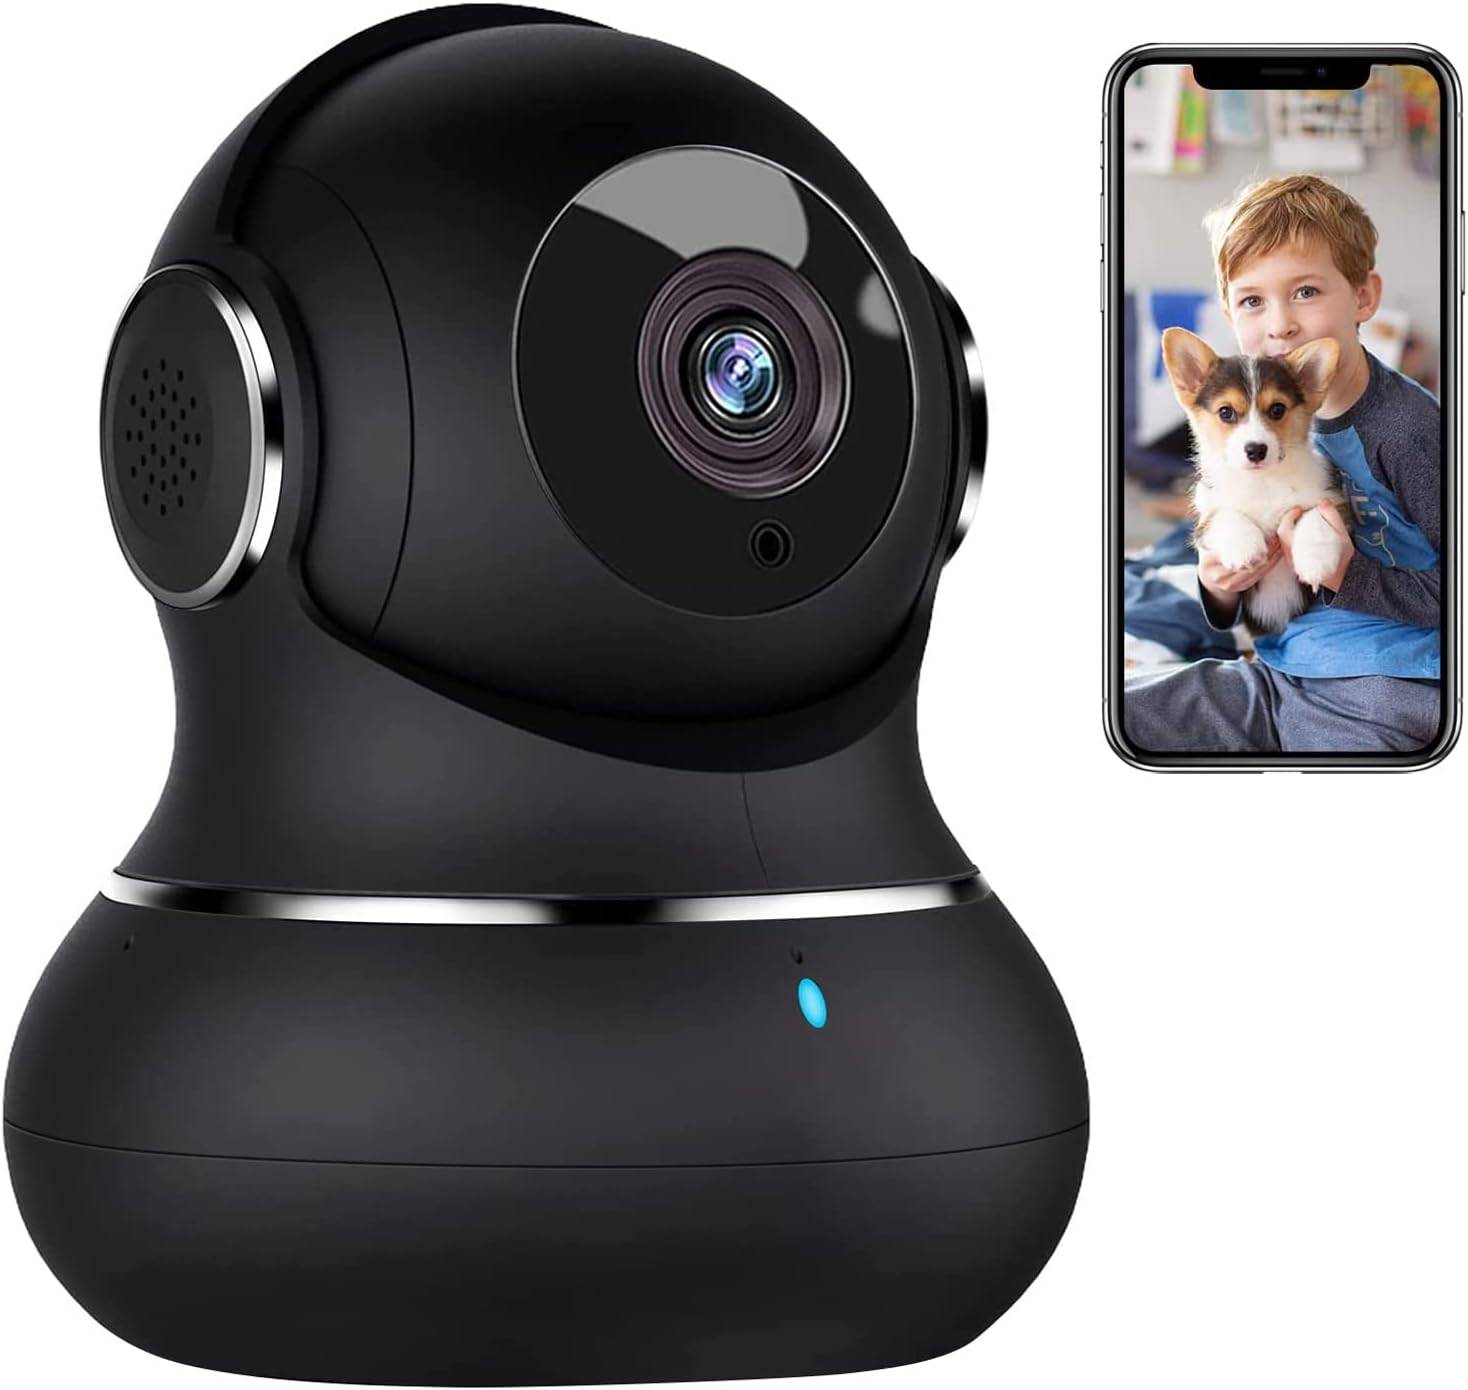 YI Pro 2K Indoor Security Cameras: Pet Cameras, WiFi Home Security System  for Baby/Elder/Nanny with Night Vision, Siren, 24/7 SD Card Storage, Phone